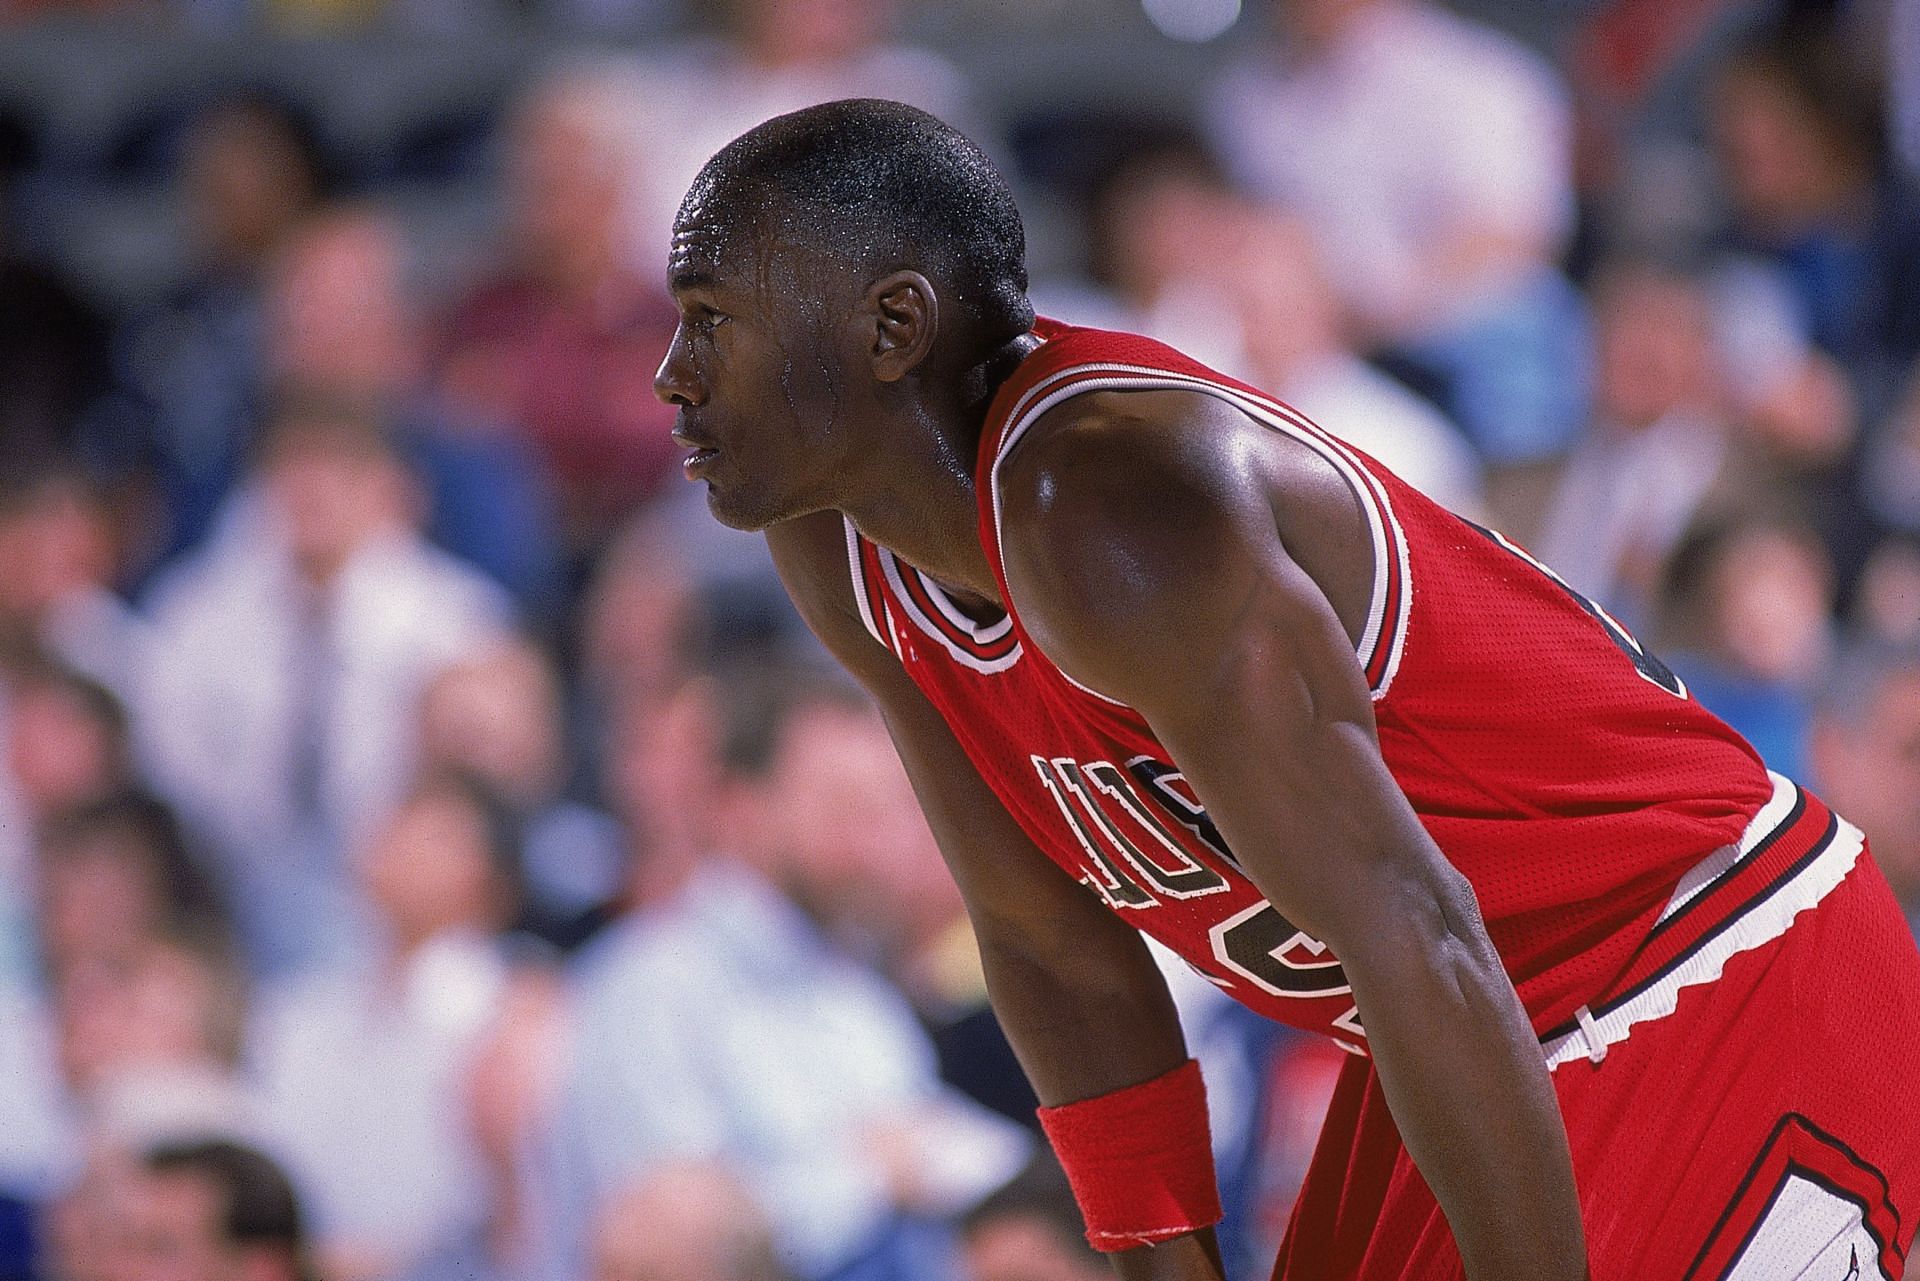 Michael Jordan during his time with the Chicago Bulls